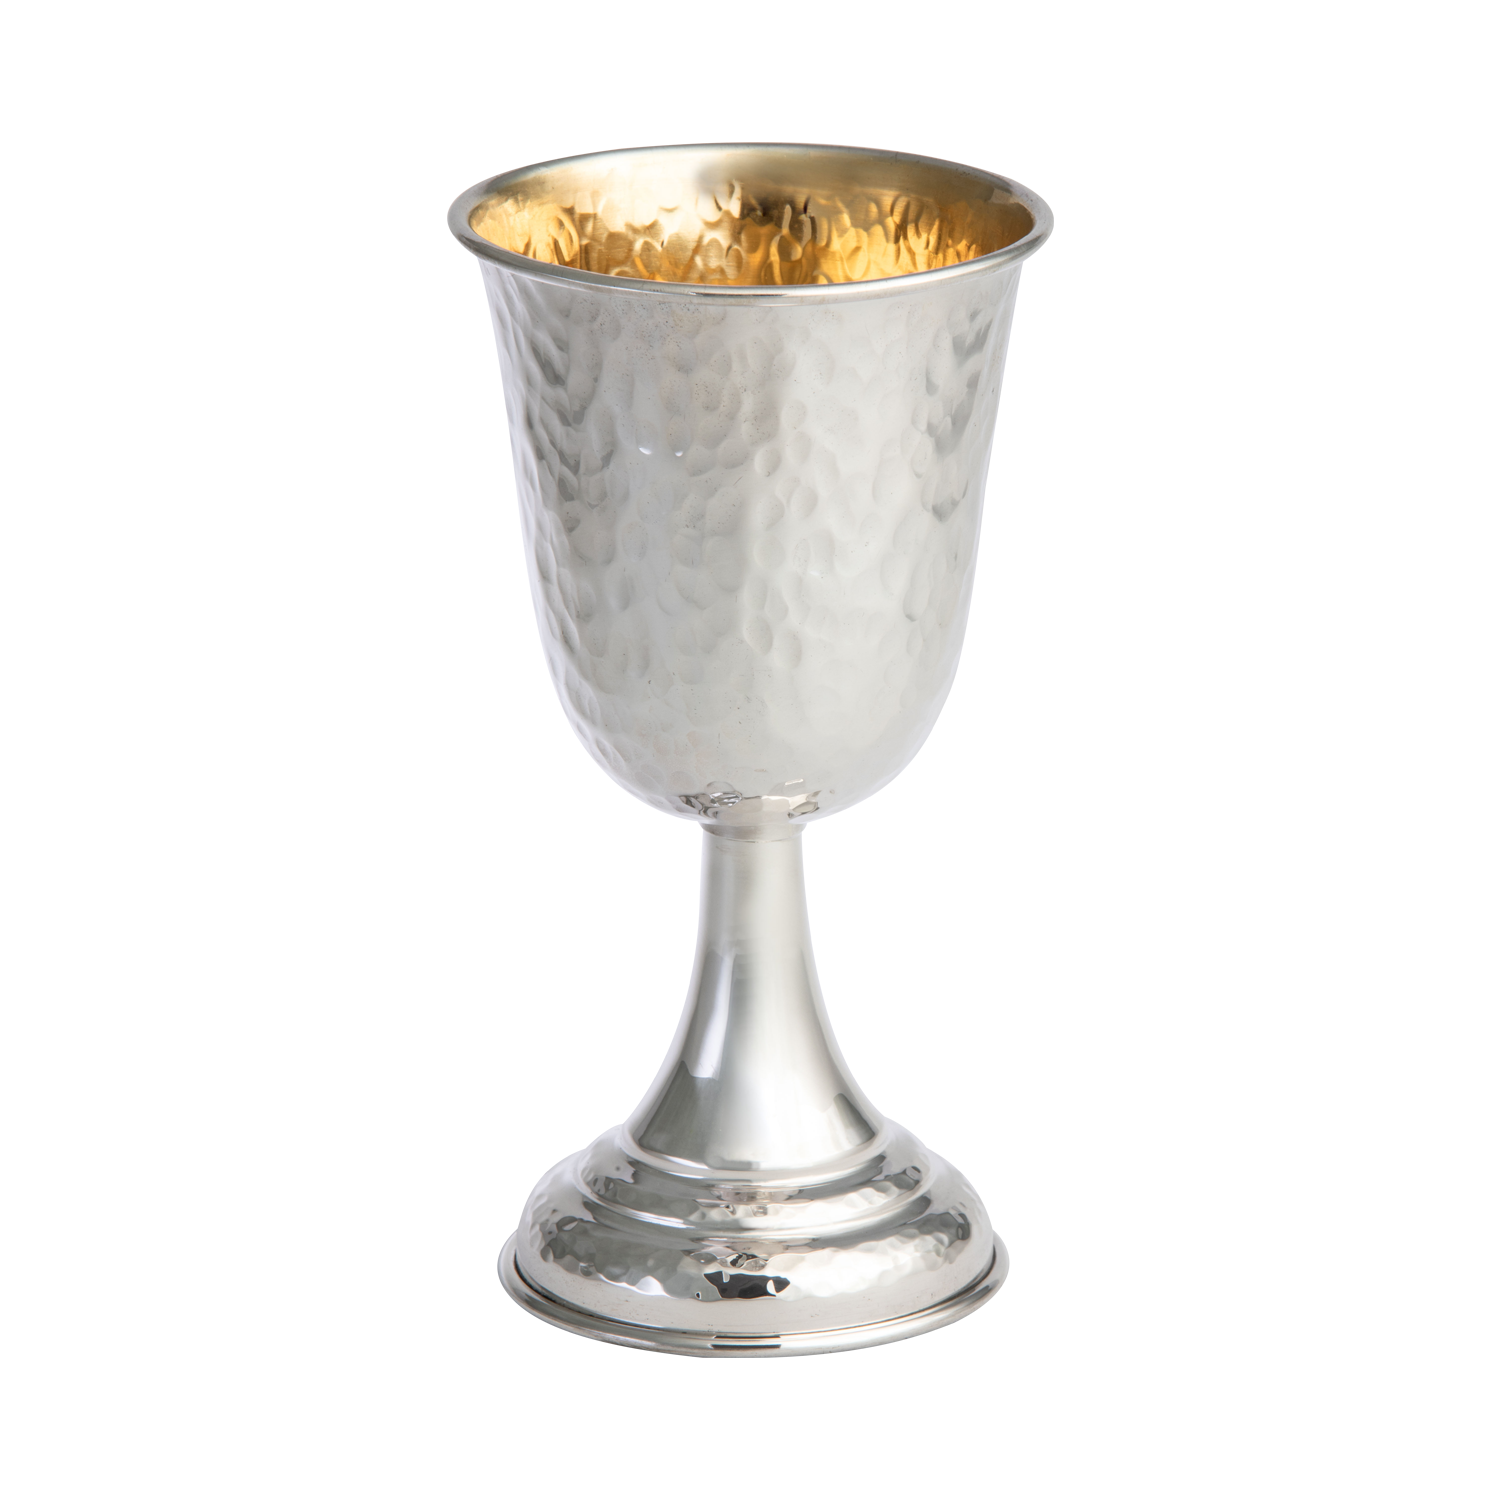 The Ultimatum 10 oz. Stainless Steel Baby Goblet Cup, Silver